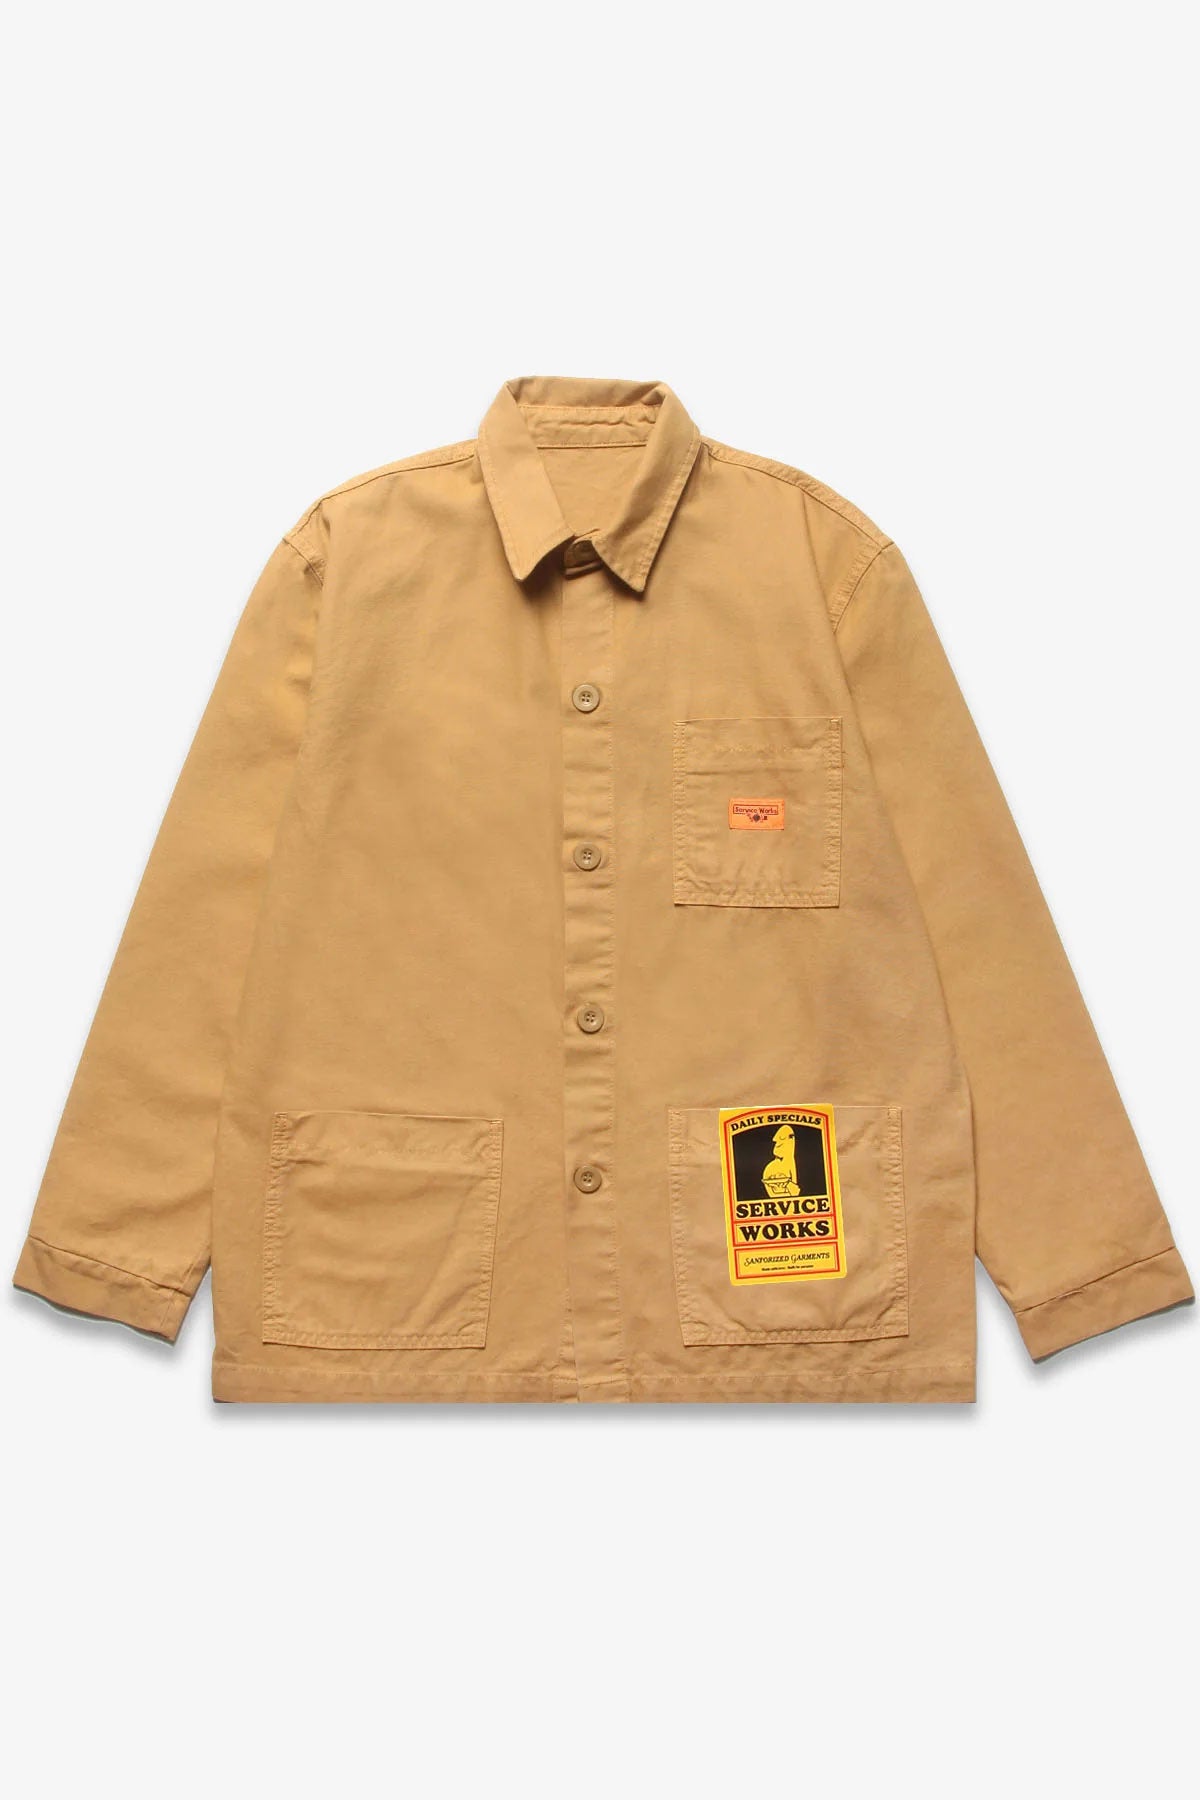 Service Works - Classic Coverall Jacket  in Tan